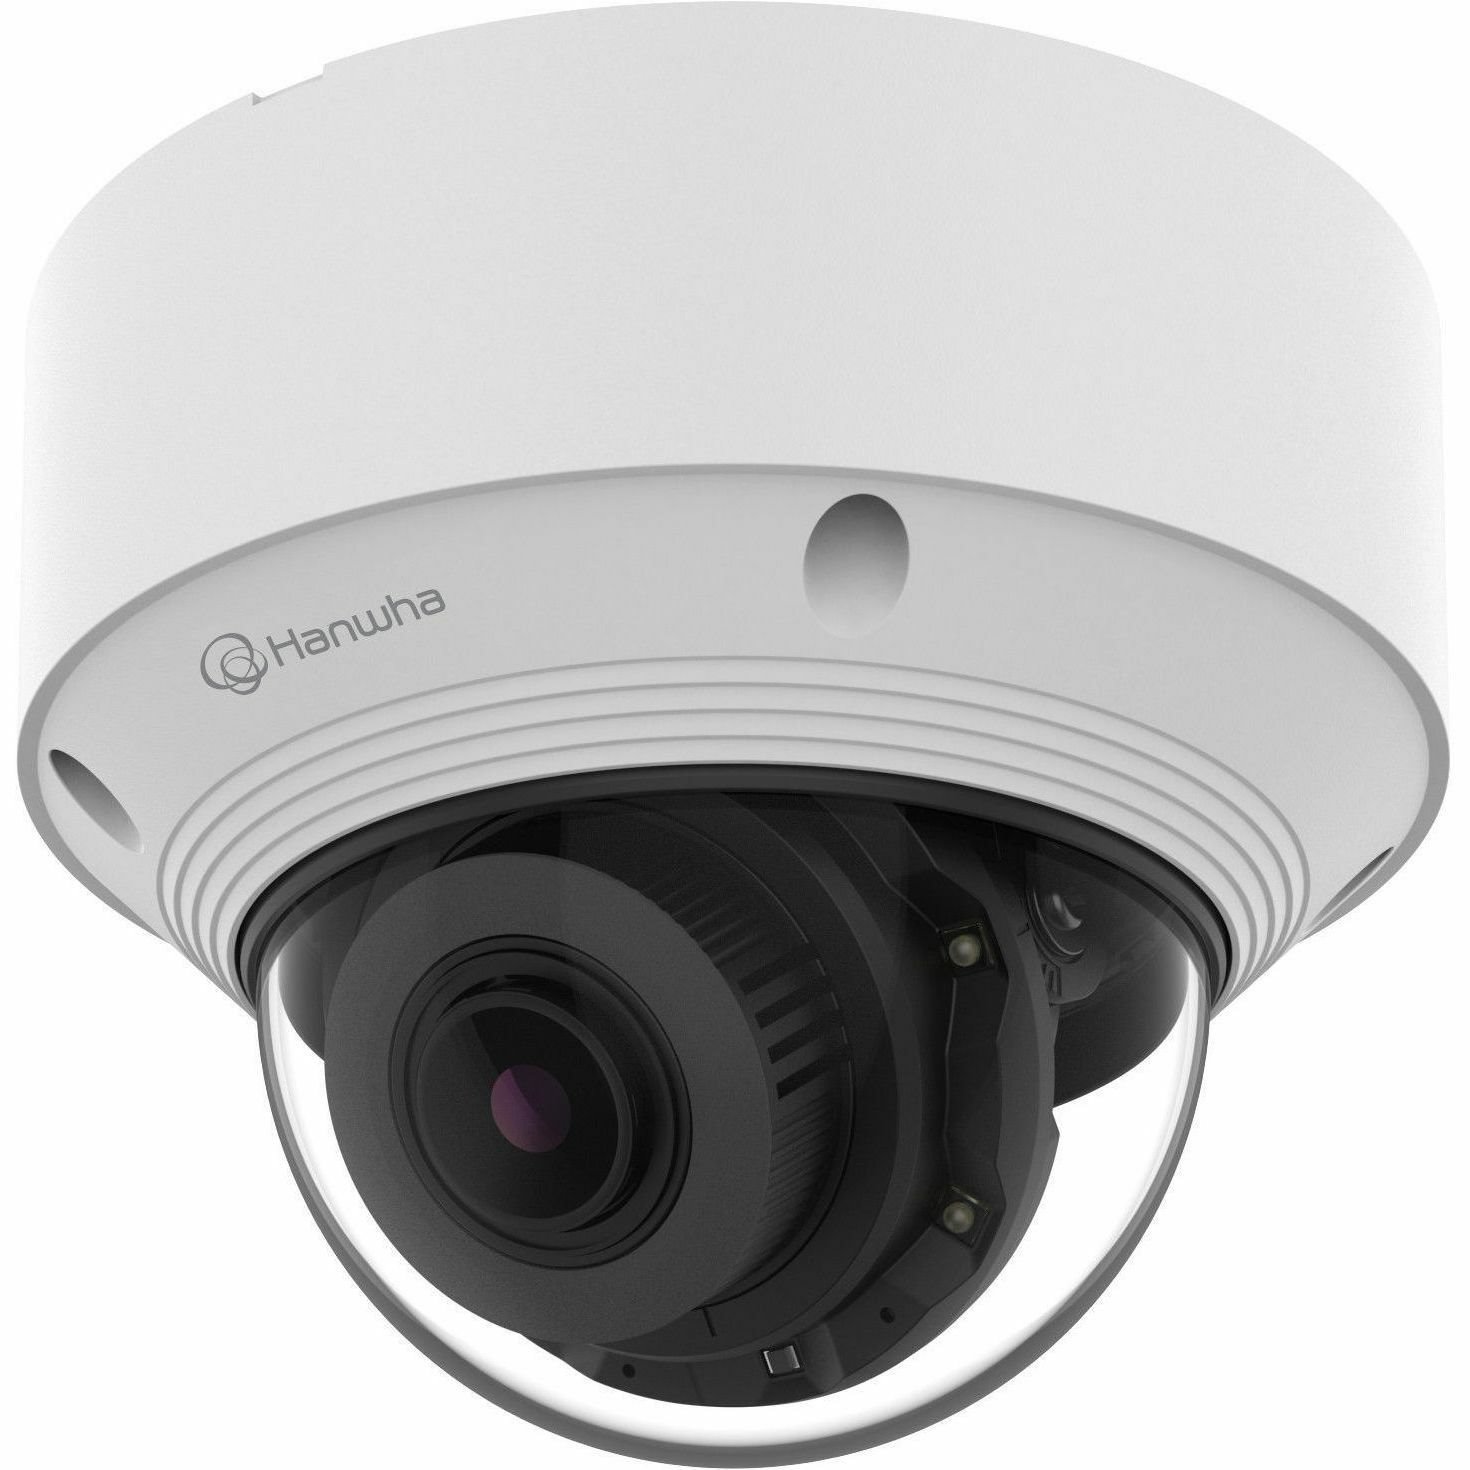 Hanwha QNV-C8083R 5 Megapixel Outdoor Network Camera - Color - Dome - White